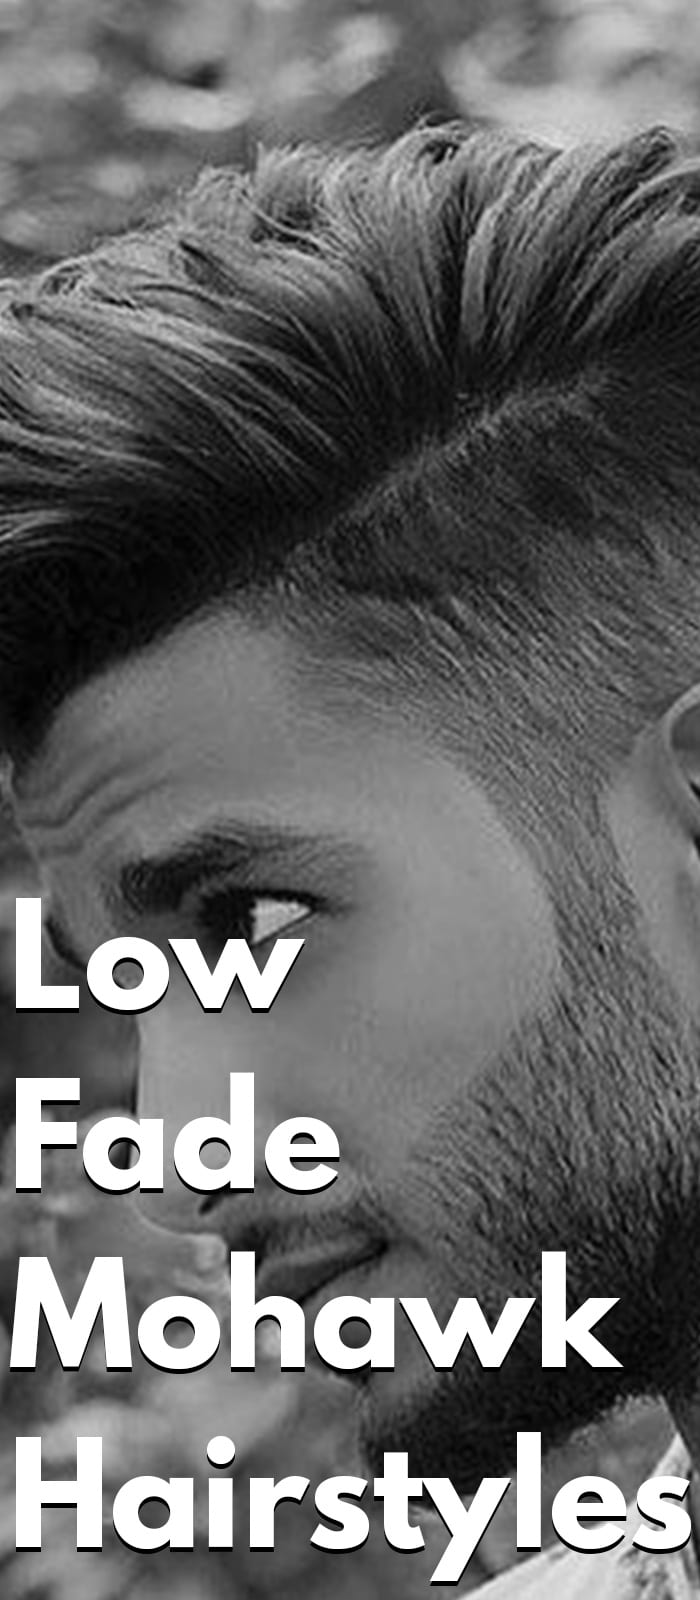 Low Fade Mohawk Hairstyles